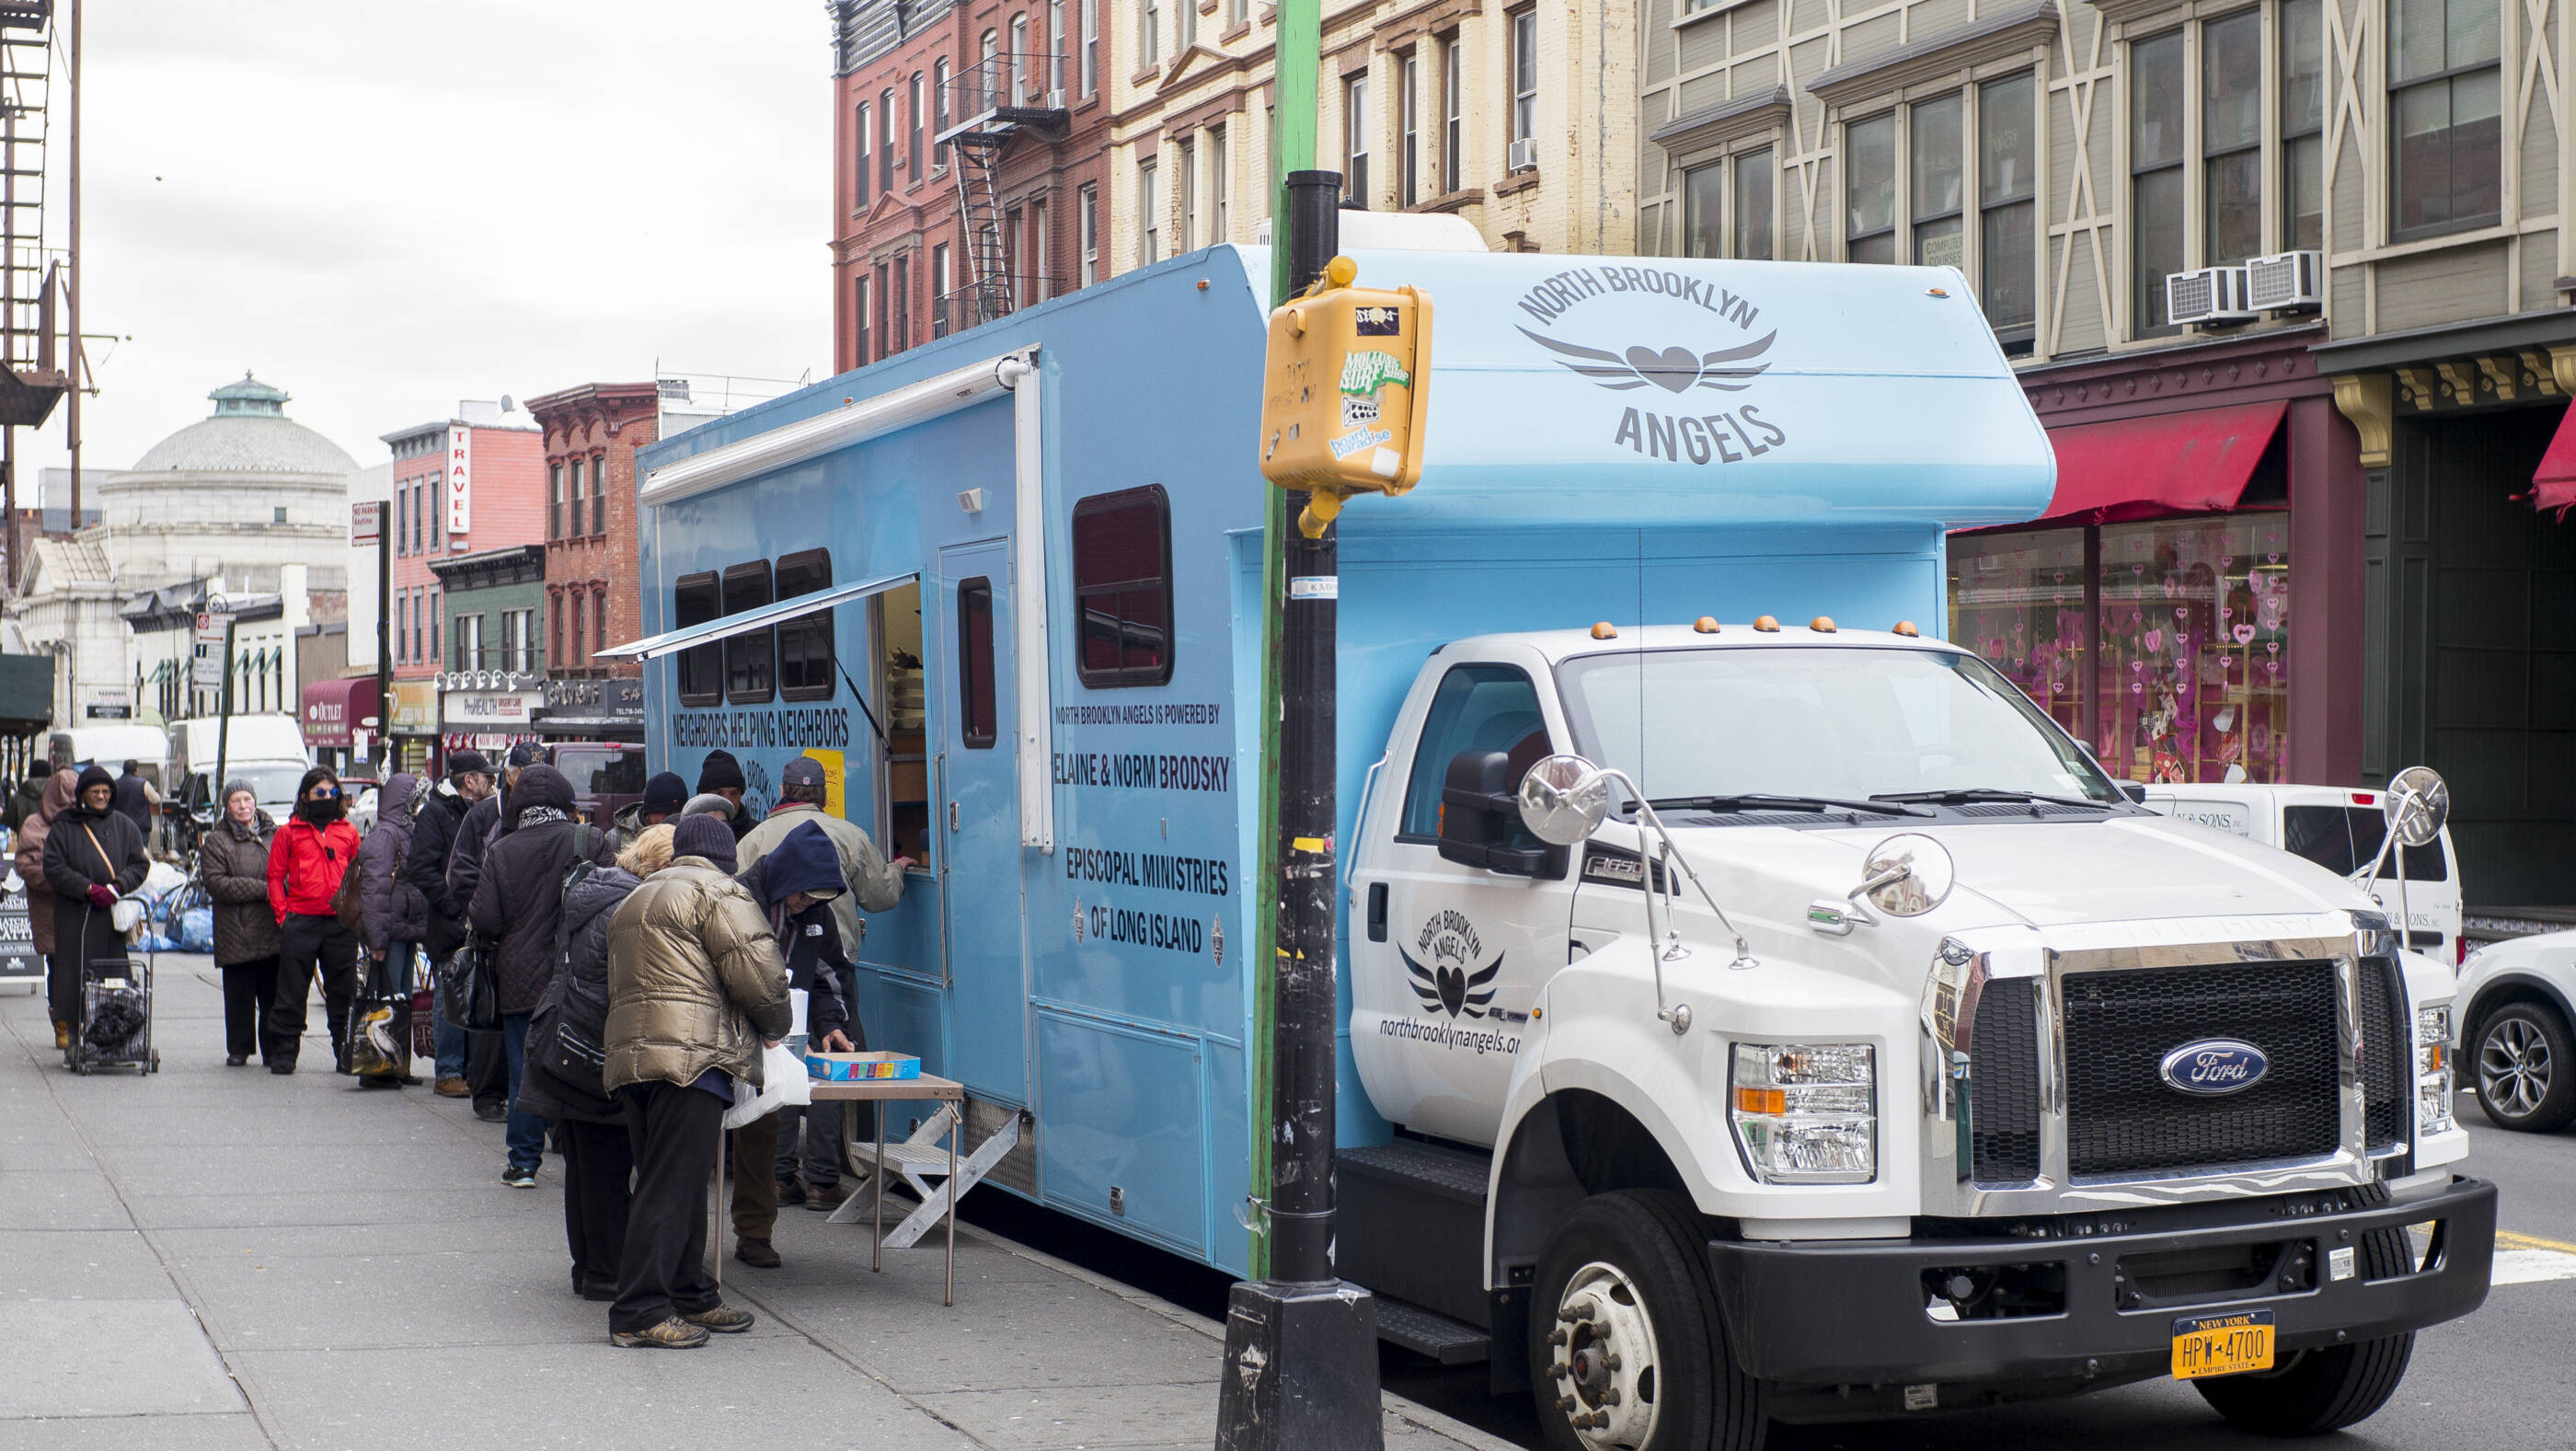 People lined up on the sidewalk at the food truck waiting for food in Brooklyn, NY.